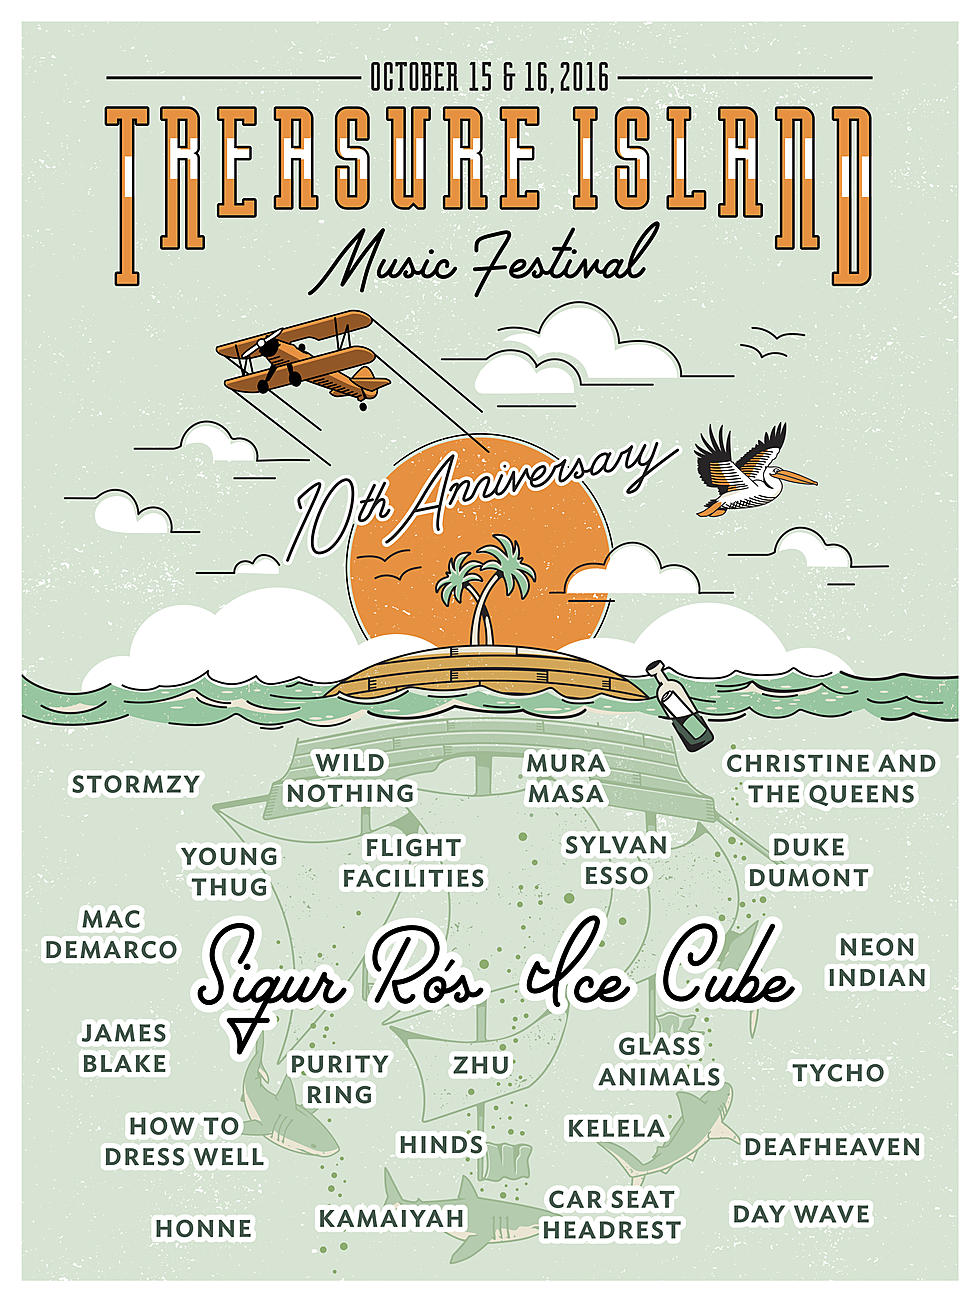 TREASURE ISLAND Announces Lineup for 10th Annual Event Oct. 15 &#038; 16 in San Francisco